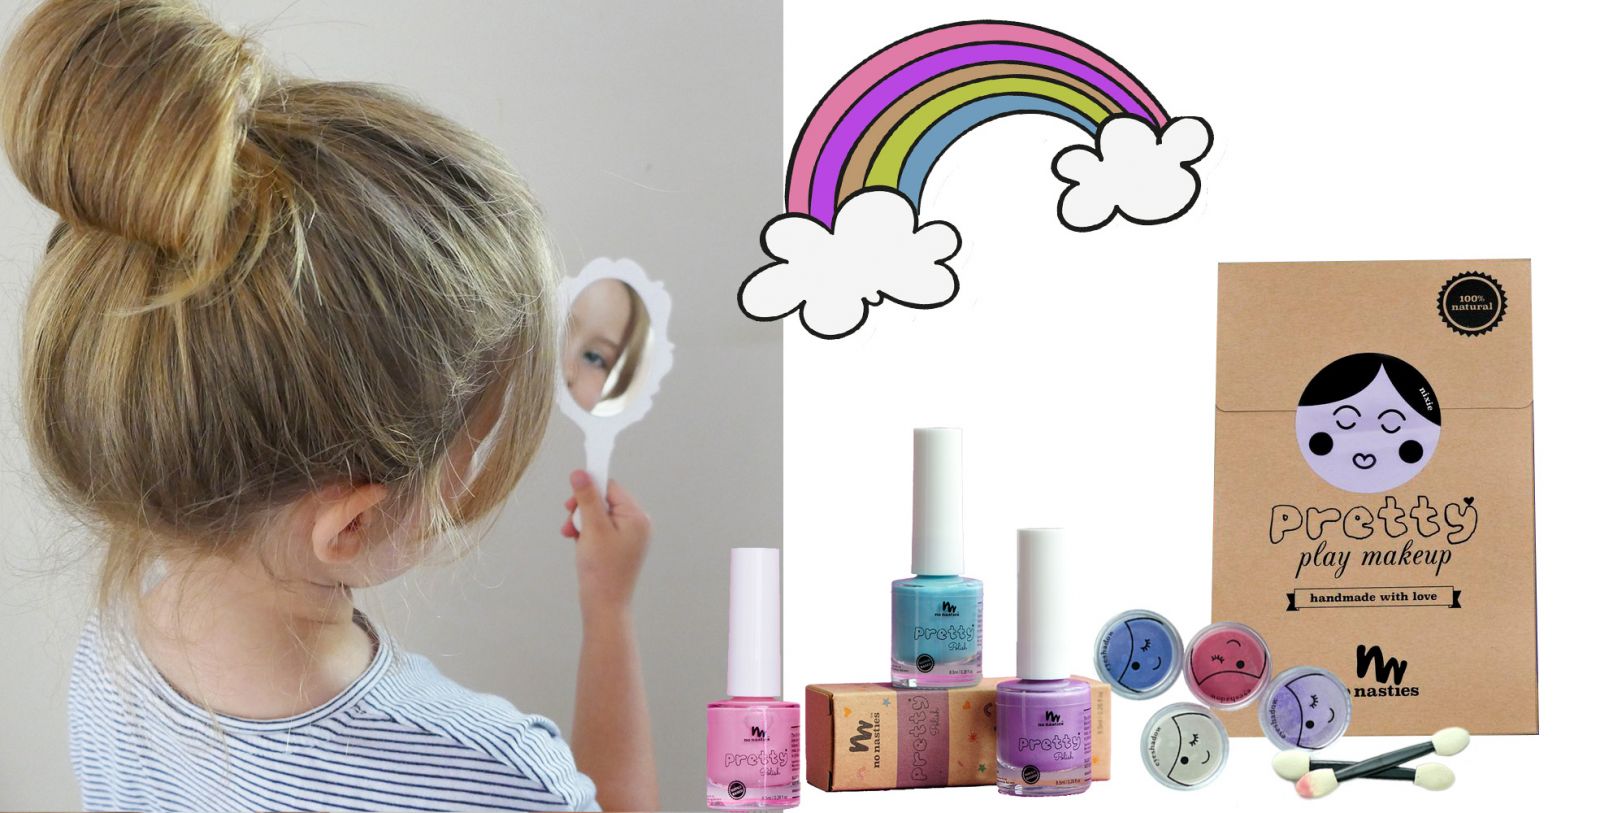 No Nasties Kids is a range of natural play makeup made in Australia